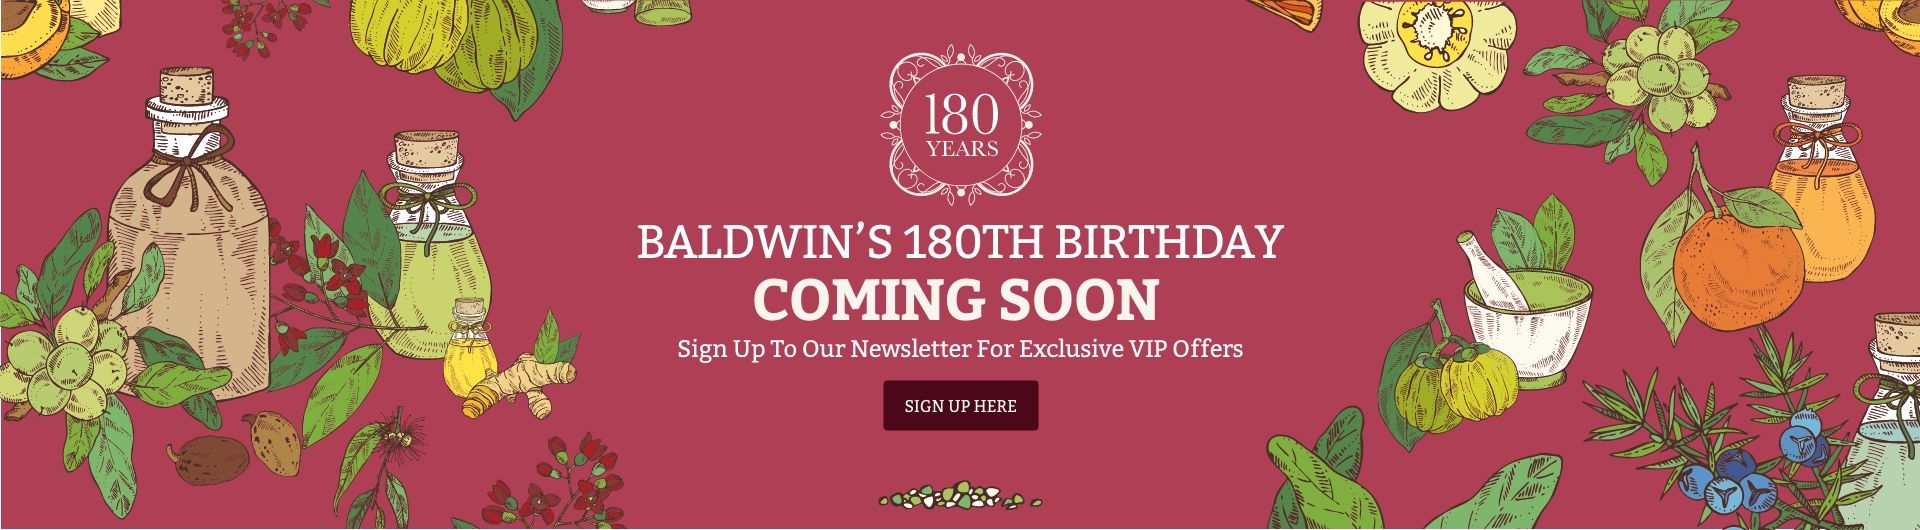 Our 180th Birthday Is Coming Up!